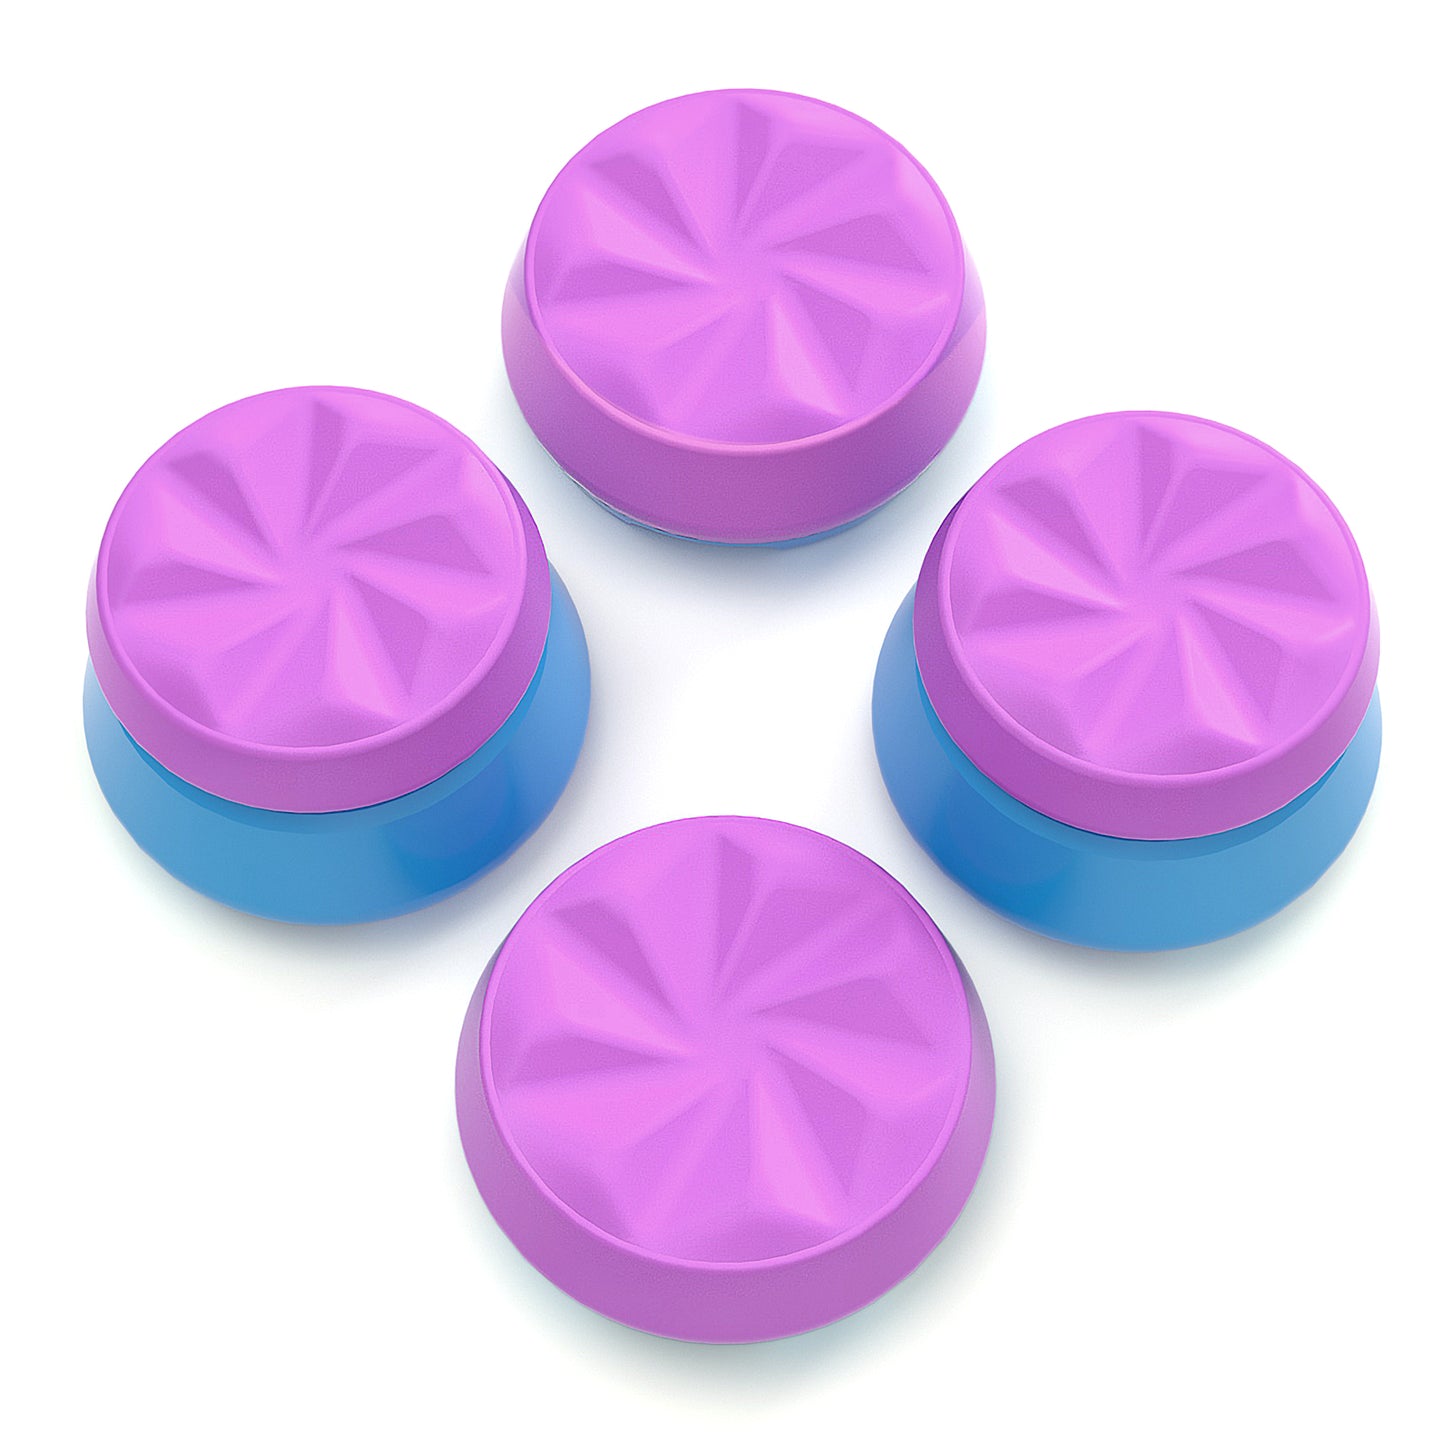 Products PlayVital Thumbs Assault Hurricane Thumbstick Extender for ps5 Controller, Thumb Grips for ps4 Controllers, Joystick Caps for ps5/4 Controller -2 High Raise and 2 Mid Raise Concave - Orchid Purple & Heaven Blue - PJM4008 PlayVital